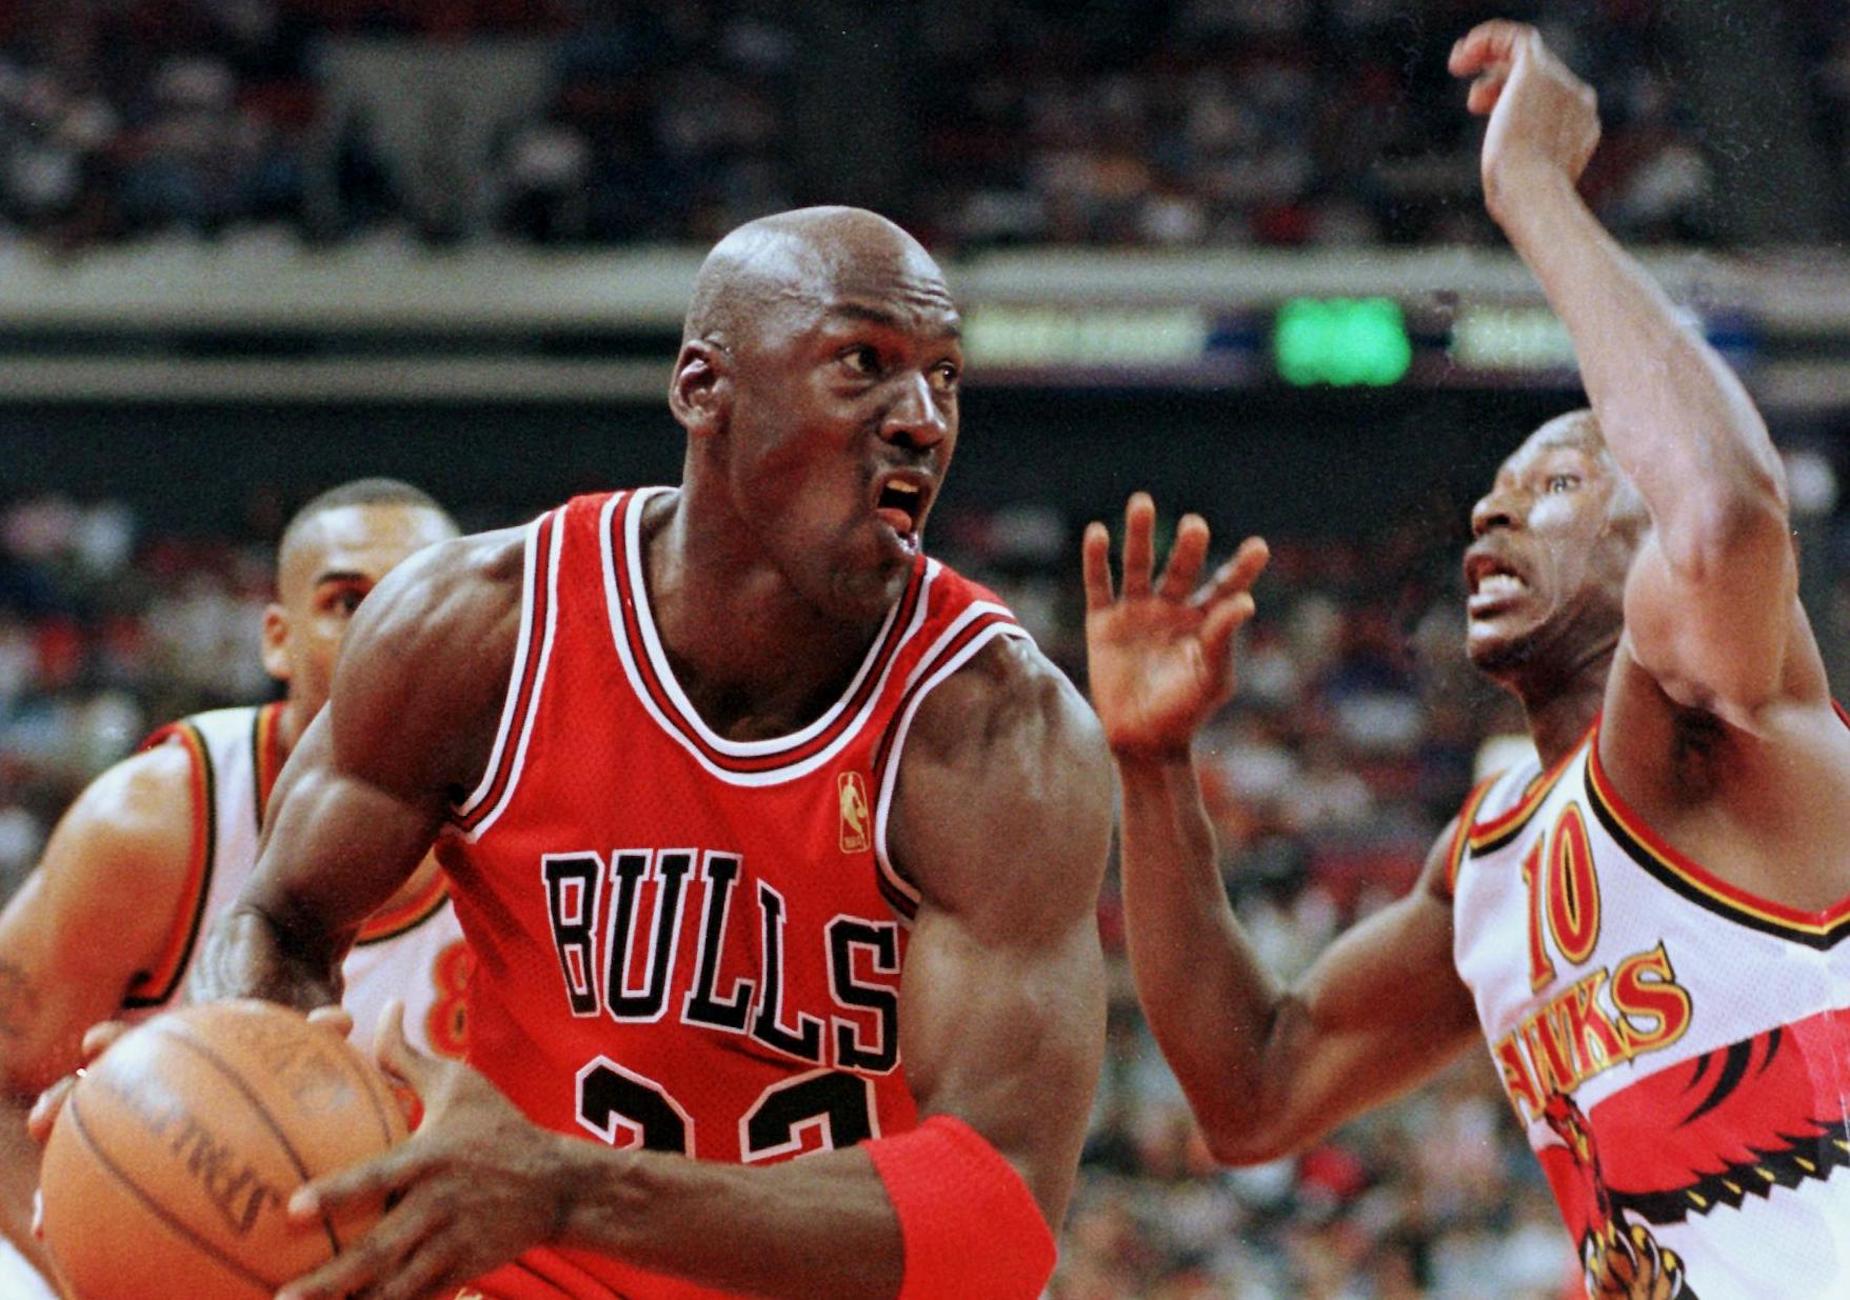 Michael Jordan and Mookie Blaylock during a 1997 NBA playoff game.